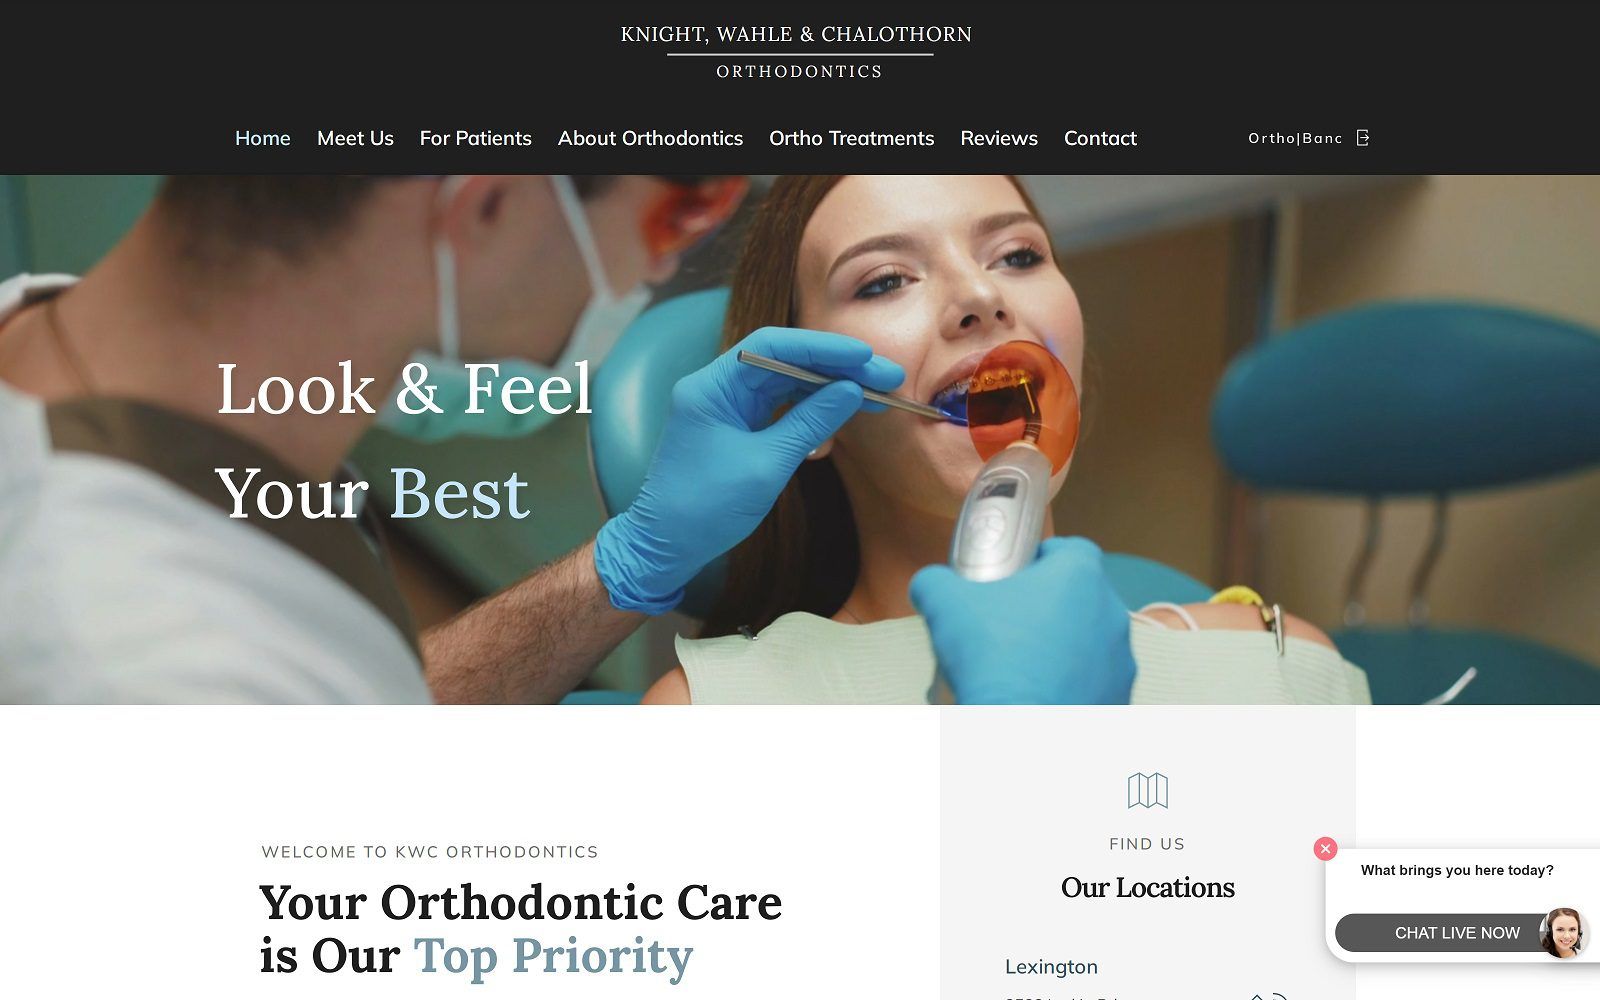 The screenshot of knight, wahle & chalothorn orthodontics website